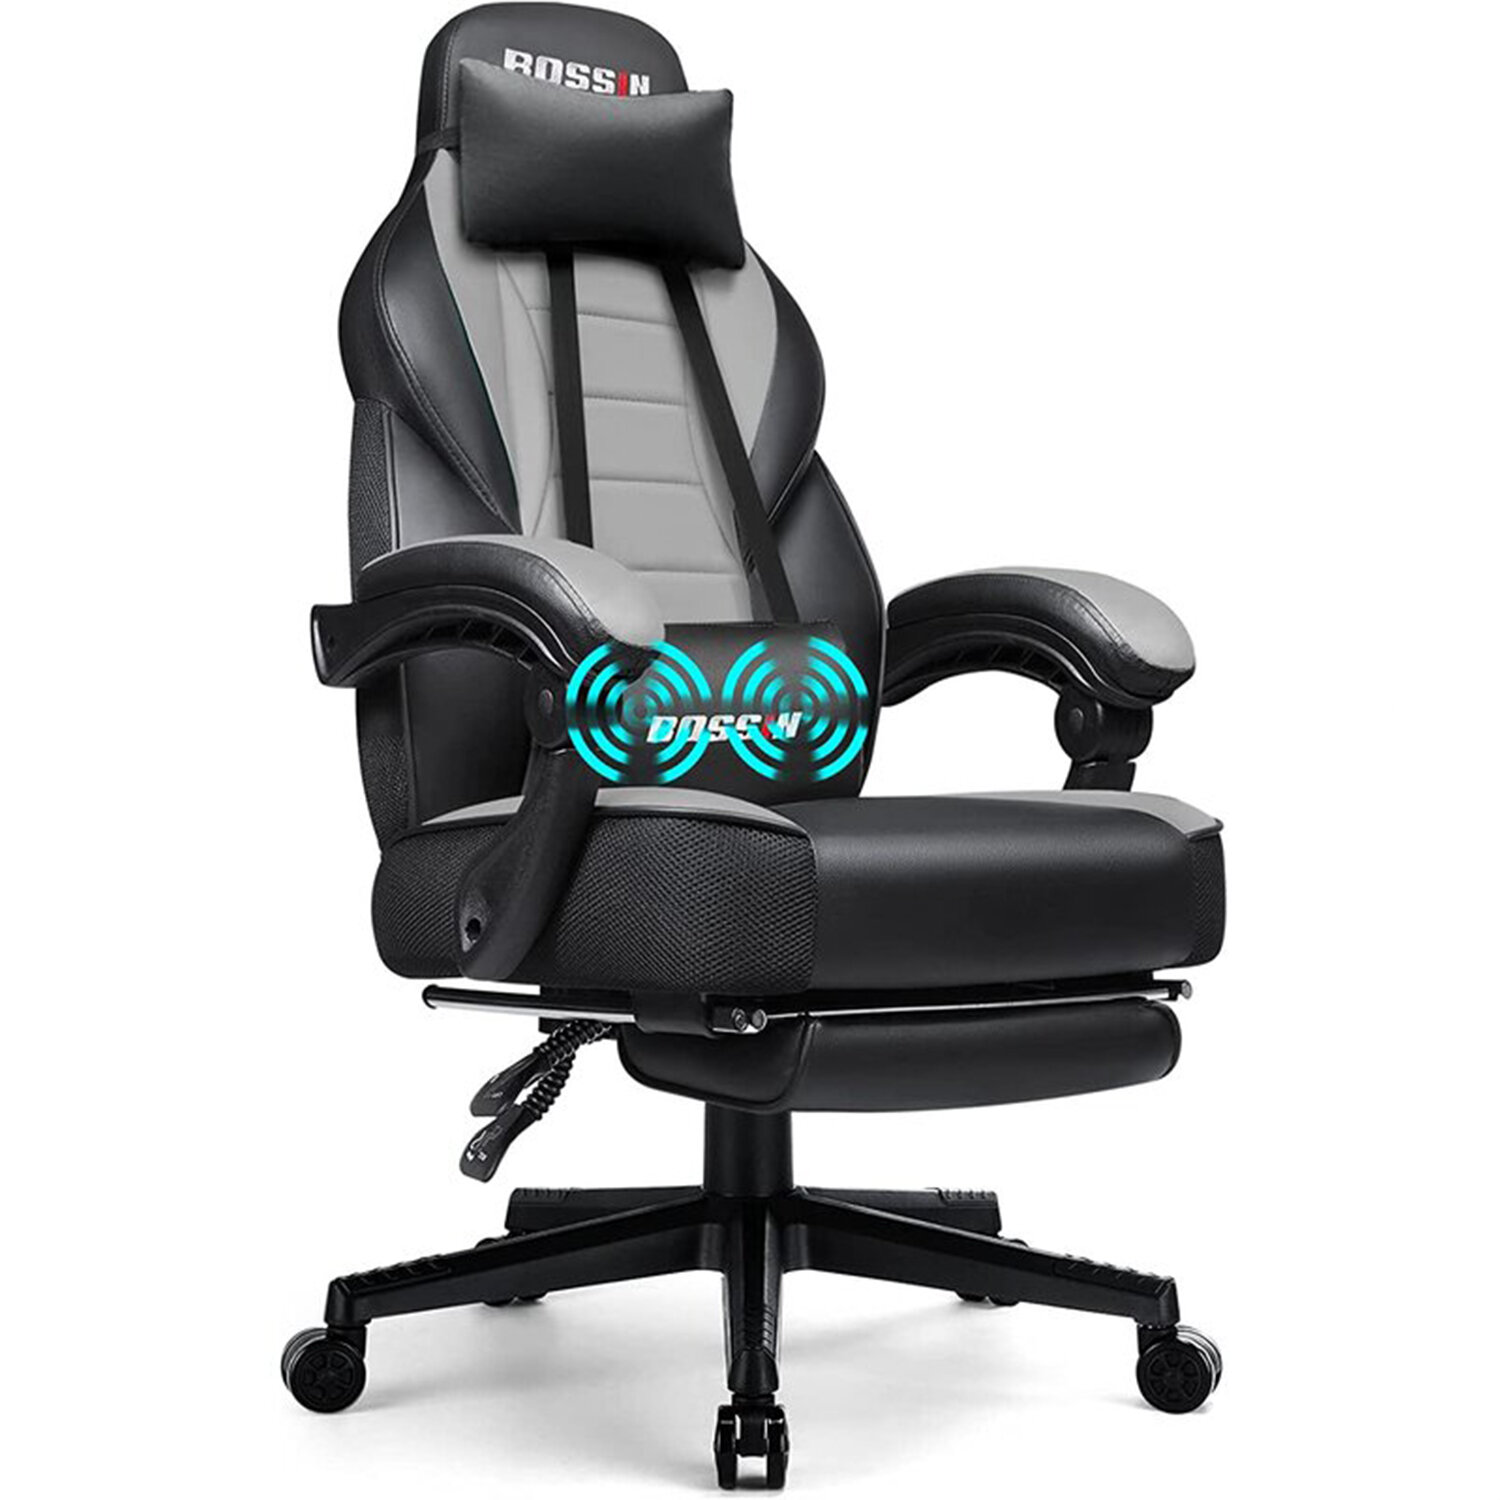 Gaming Chair Ergonomic Office Chair Headrest Lumbar Support Comfortable High Back Adjustable Reclining Computer Chair with Footrest Desk Chair PU Leather 